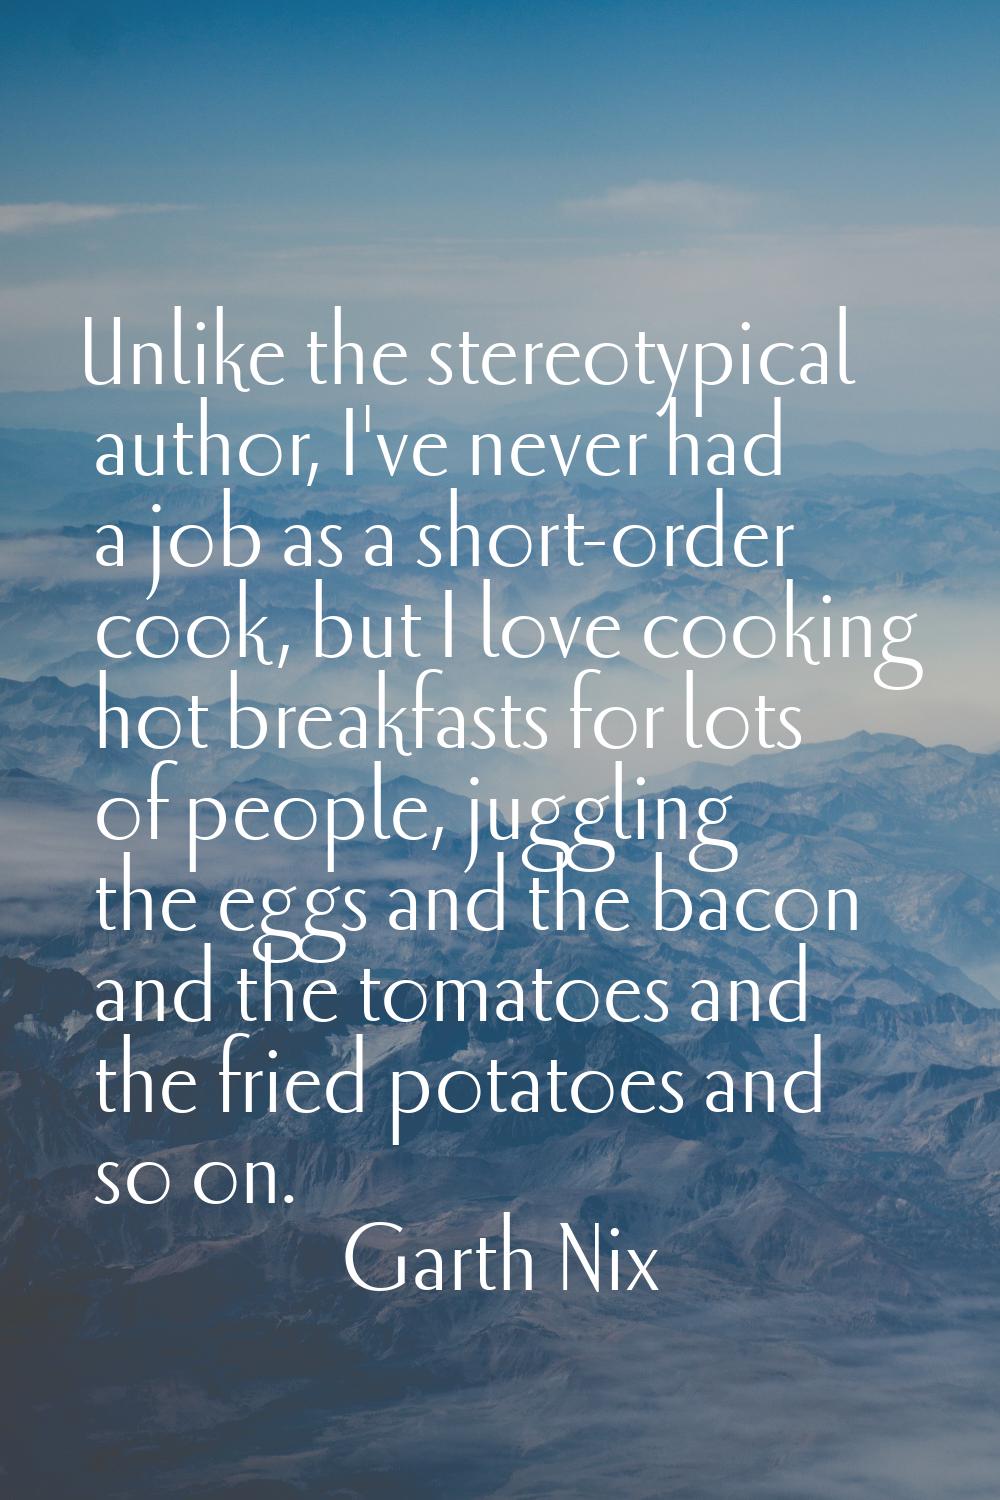 Unlike the stereotypical author, I've never had a job as a short-order cook, but I love cooking hot